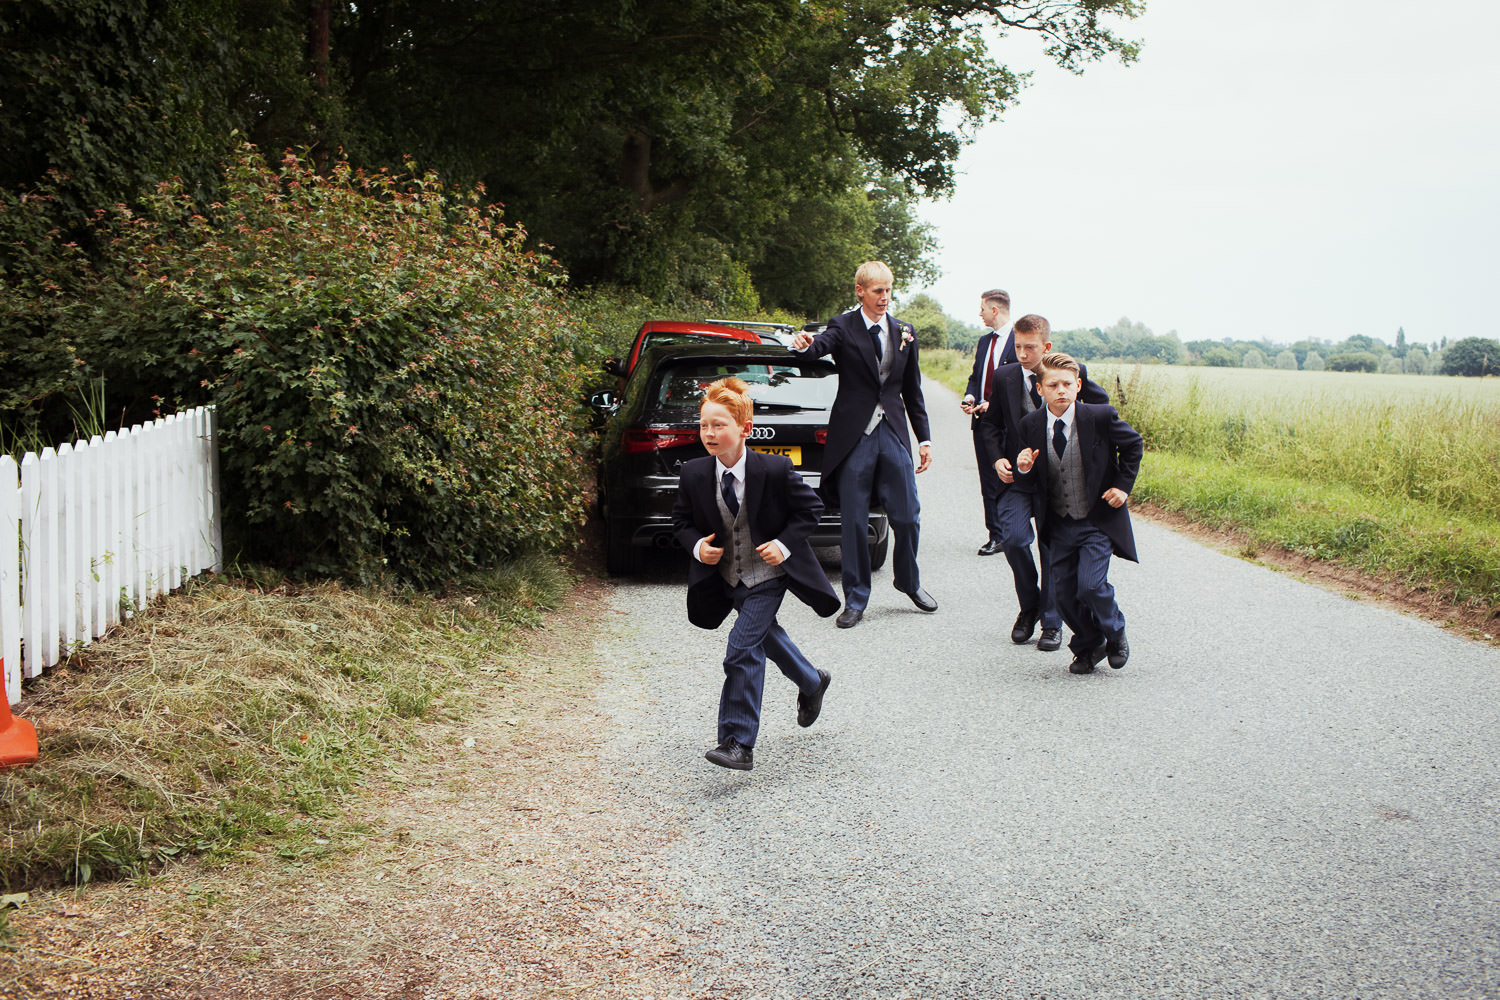 Page boys running across the road to St Peter's Church, Great Totham.